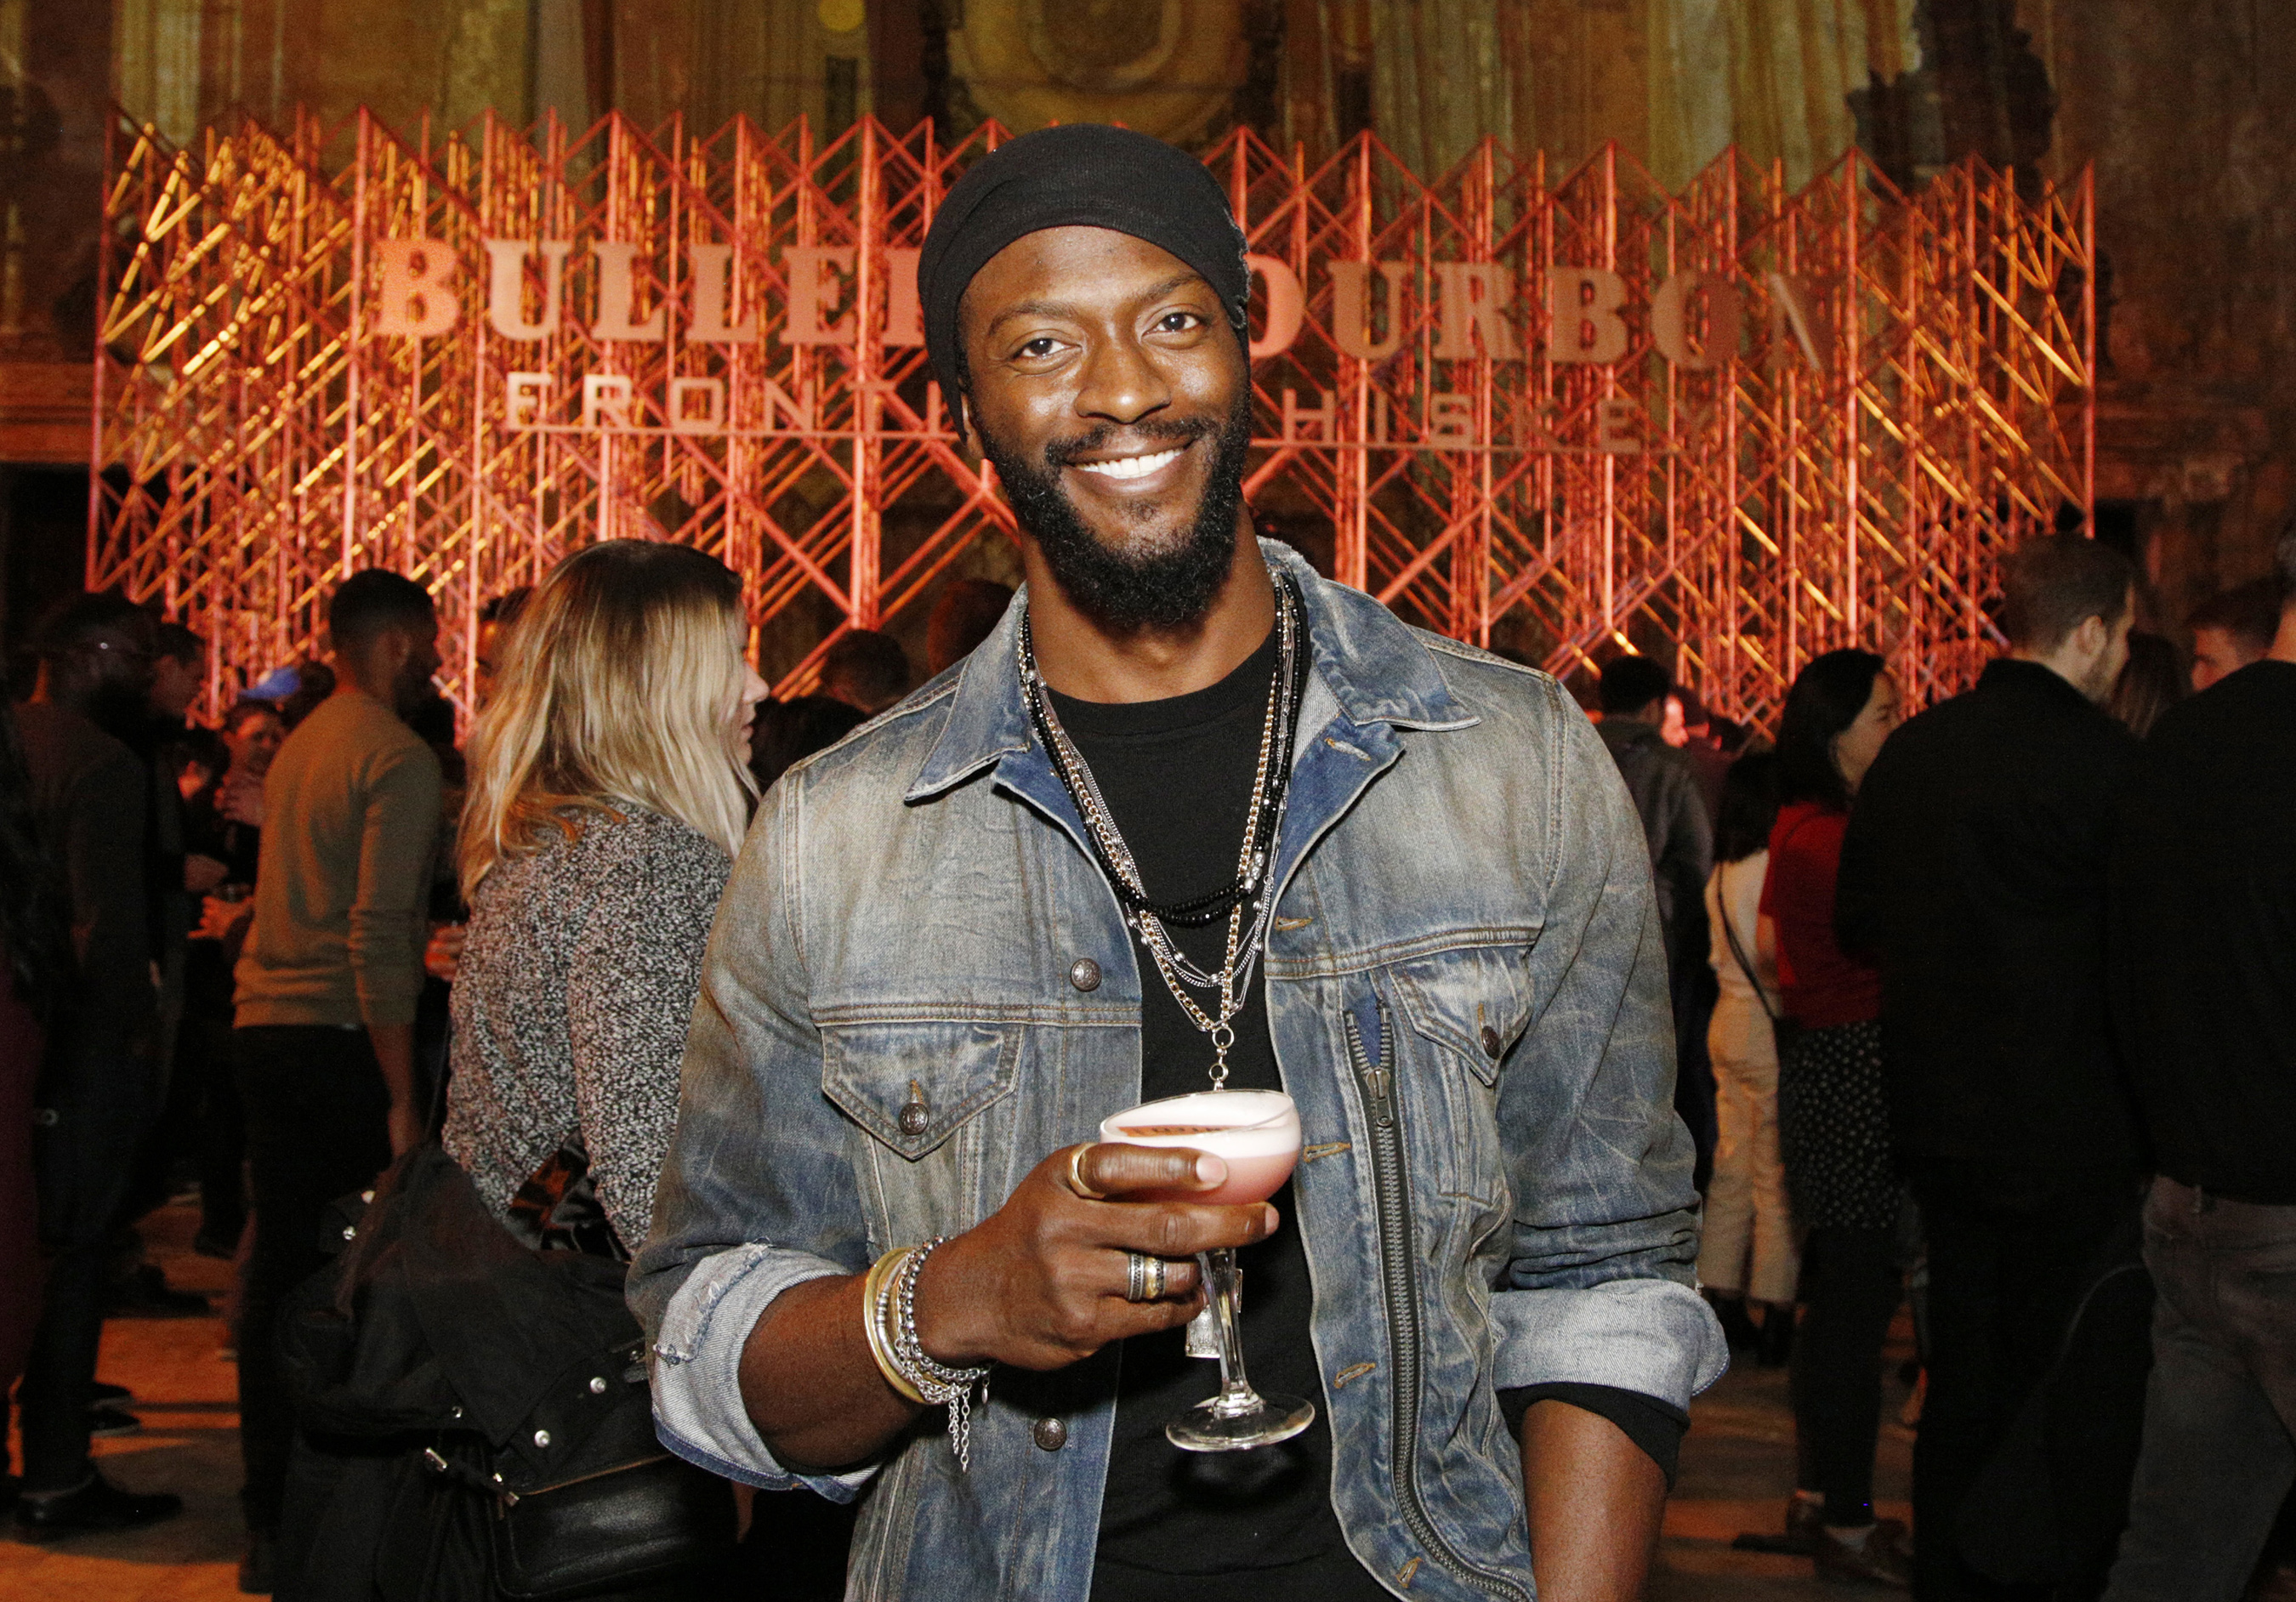 Aldis Hodge attends the Bulleit 3D Printed Frontier launch at 16th Street Station on December 6, 2018 in Oakland, California. (Photo by Kimberly White/Getty Images for Bulleit Frontier Whiskey).